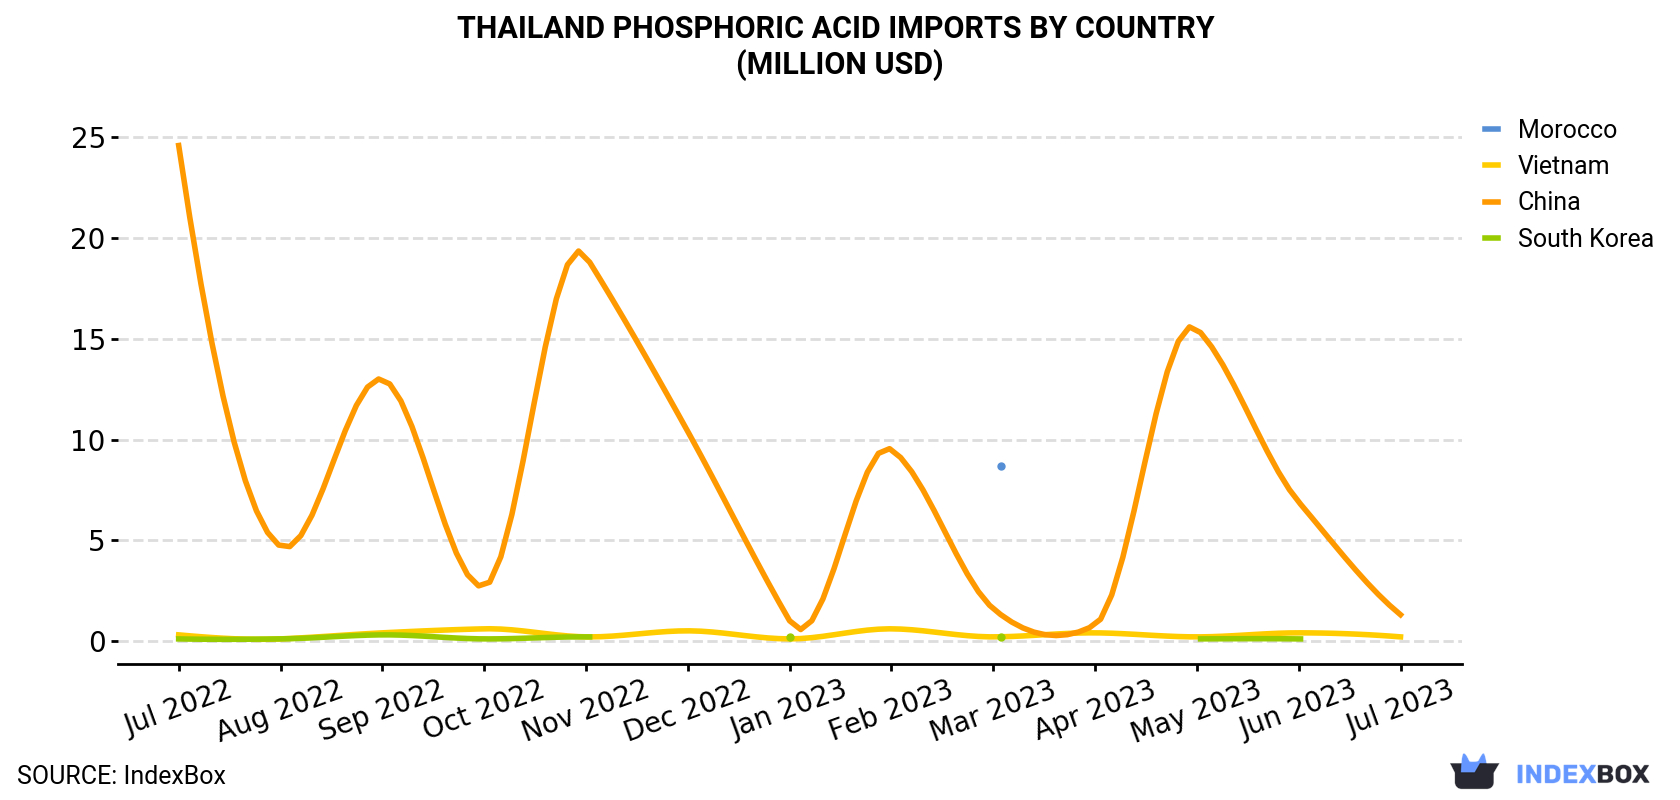 Thailand Phosphoric Acid Imports By Country (Million USD)